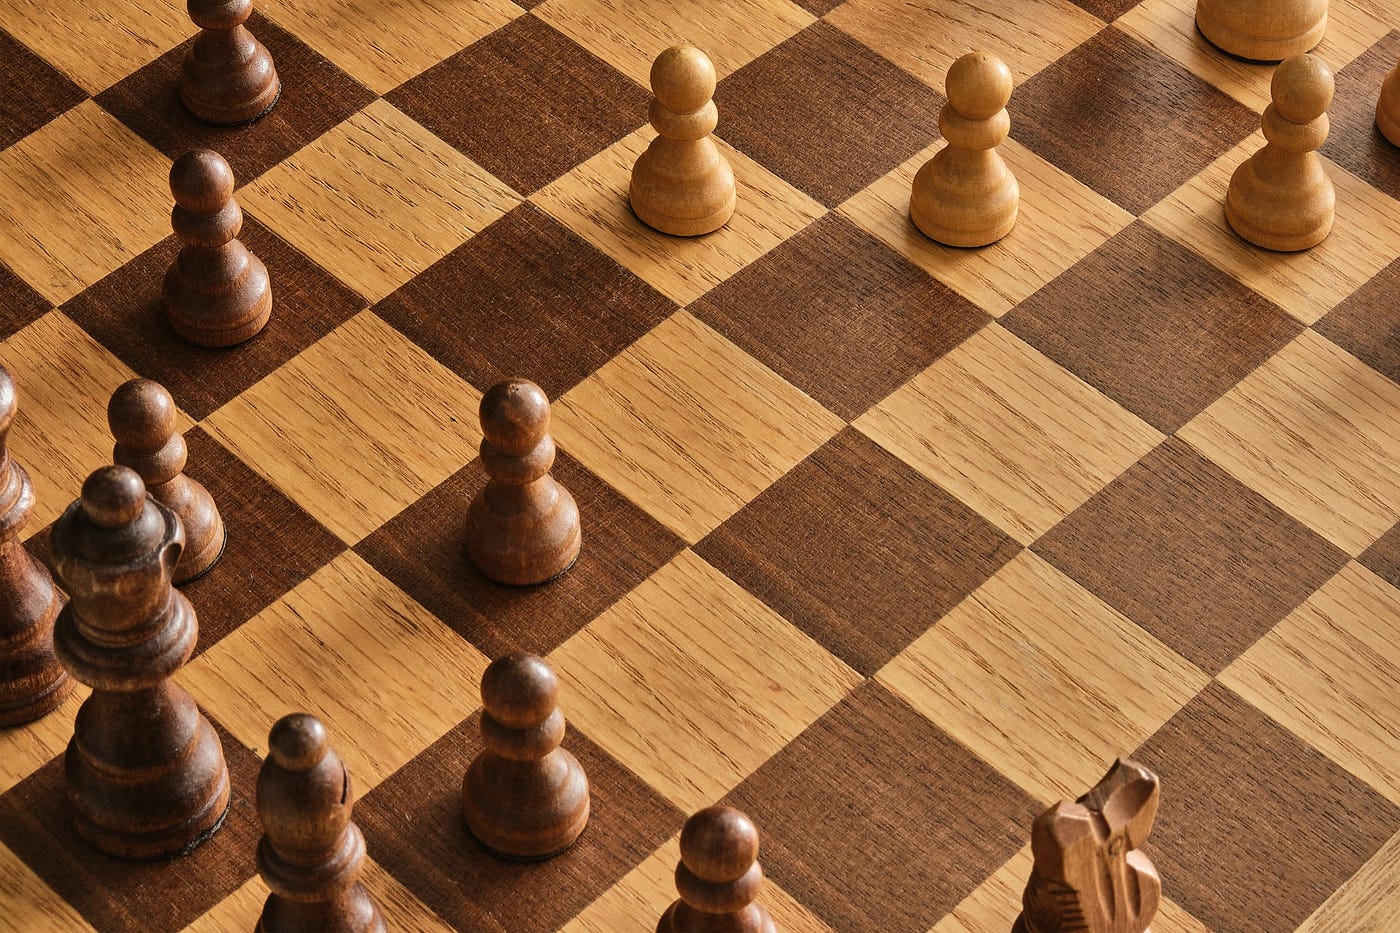 How to Write a JavaScript Chess Engine: How Chess Programs Work See more